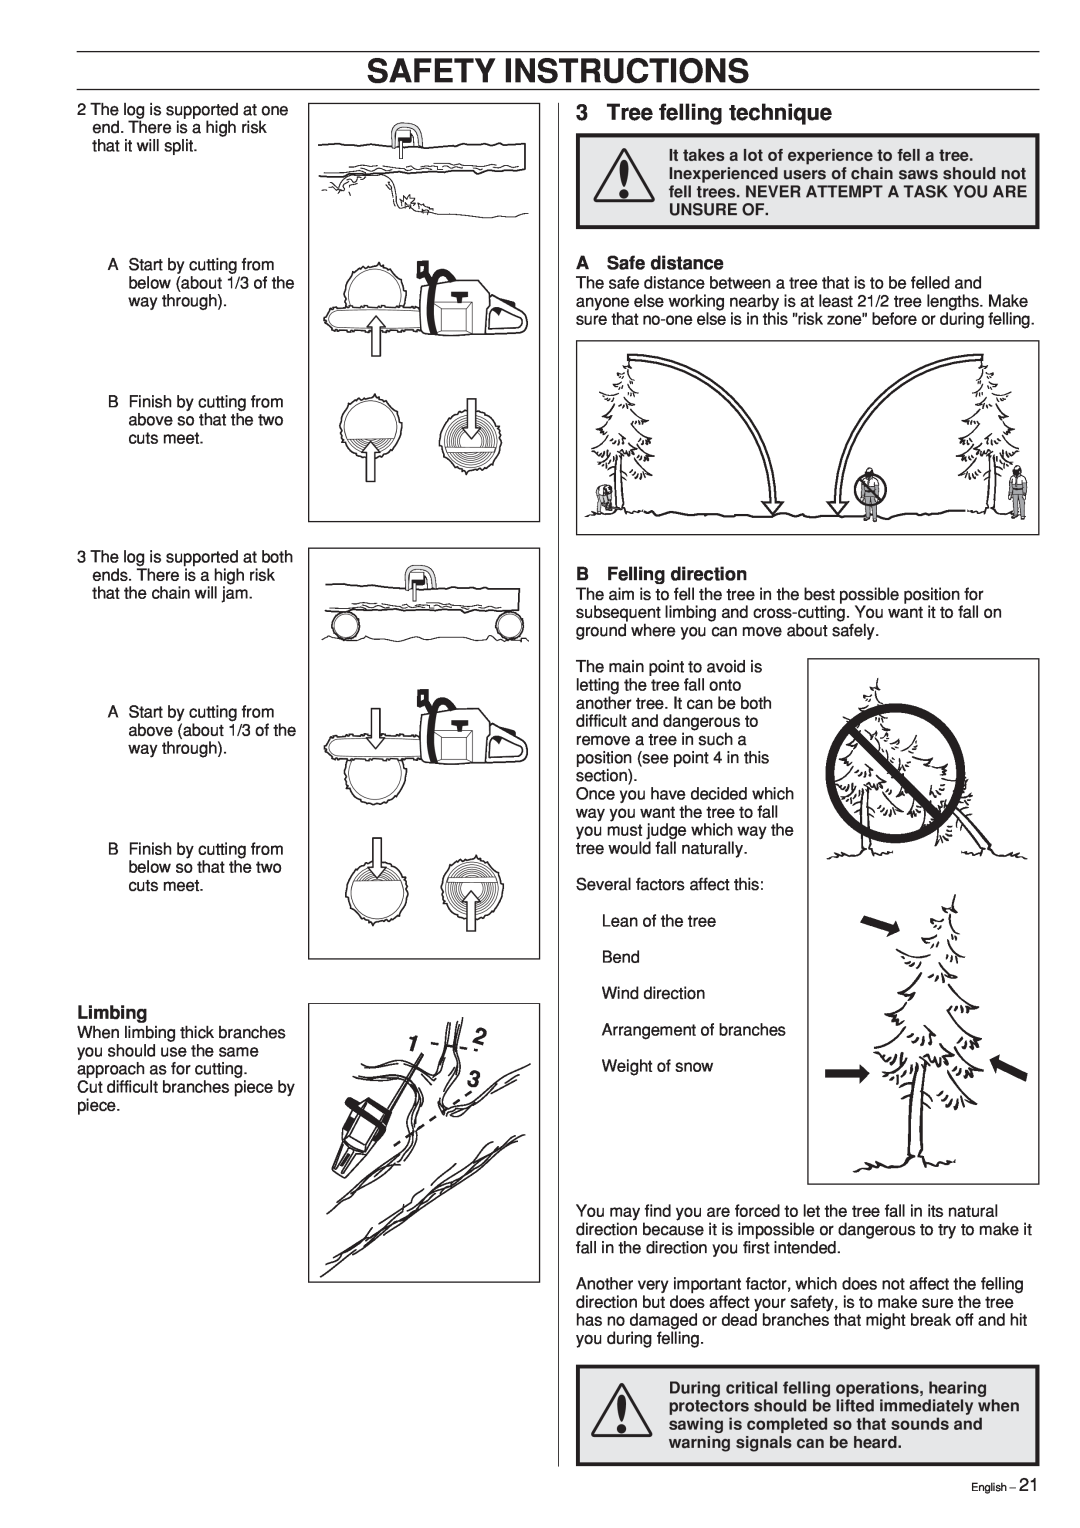 Husqvarna 55 manual Safety Instructions, Tree felling technique, A Safe distance, Limbing, B Felling direction 